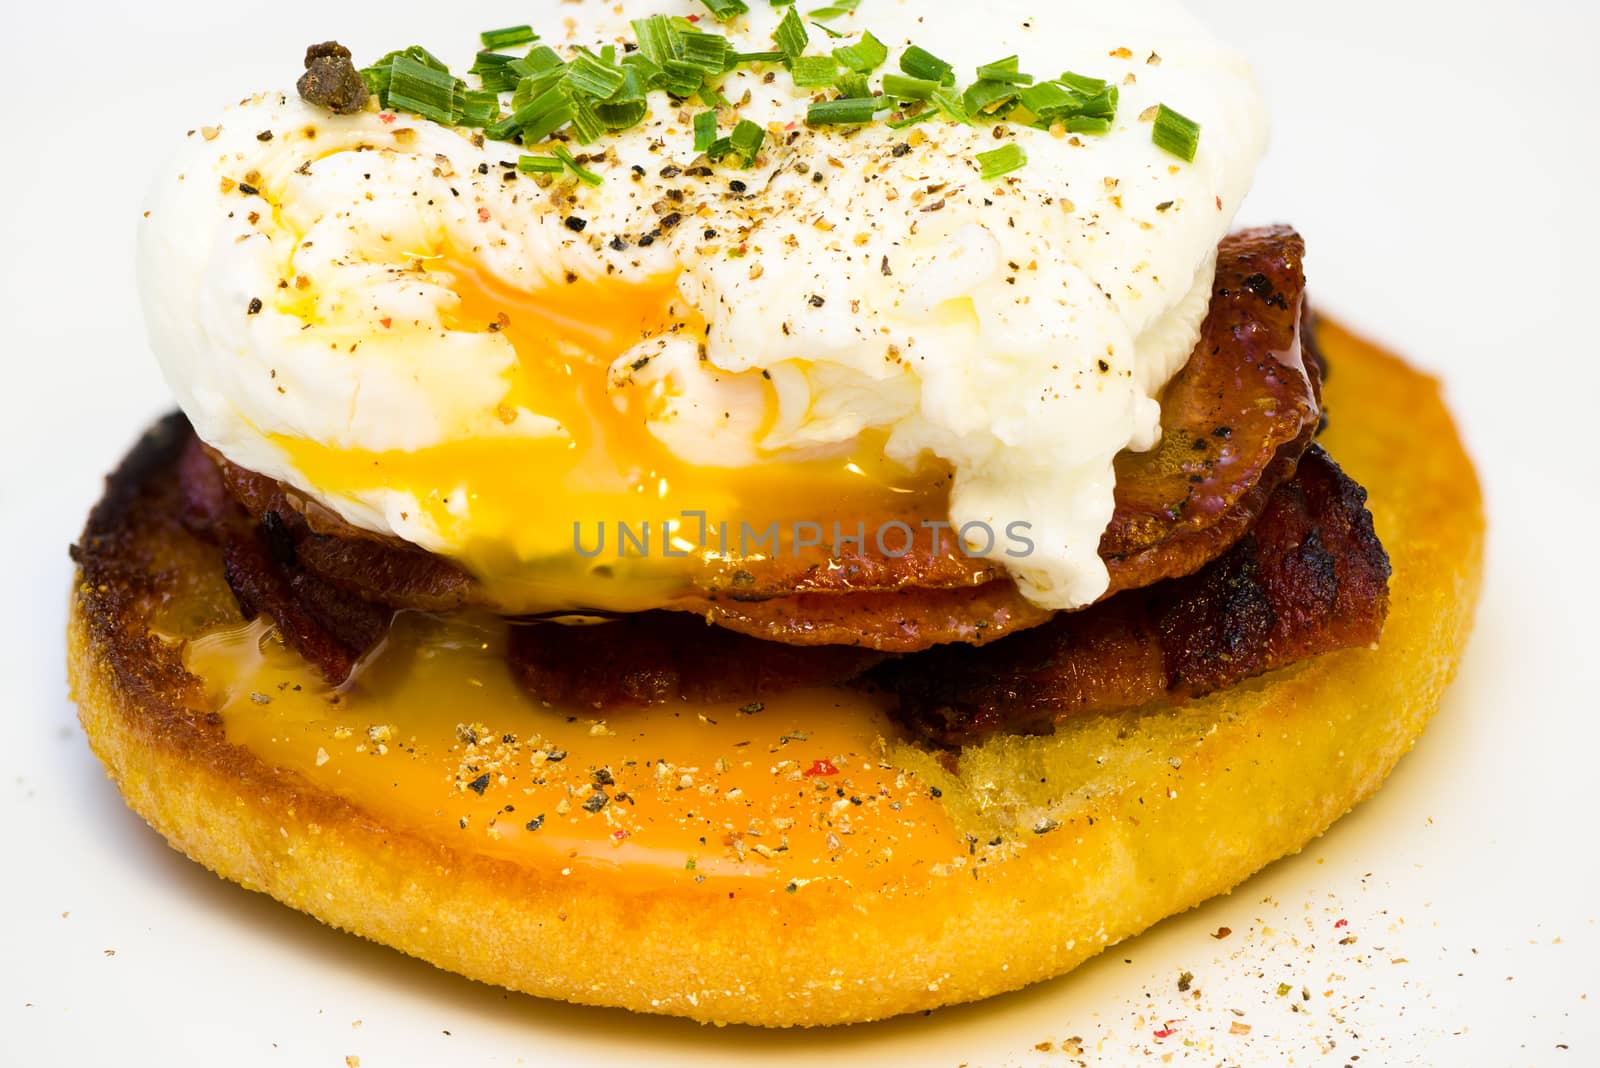 Eggs Benedict on toasted muffins with bacon and sauce